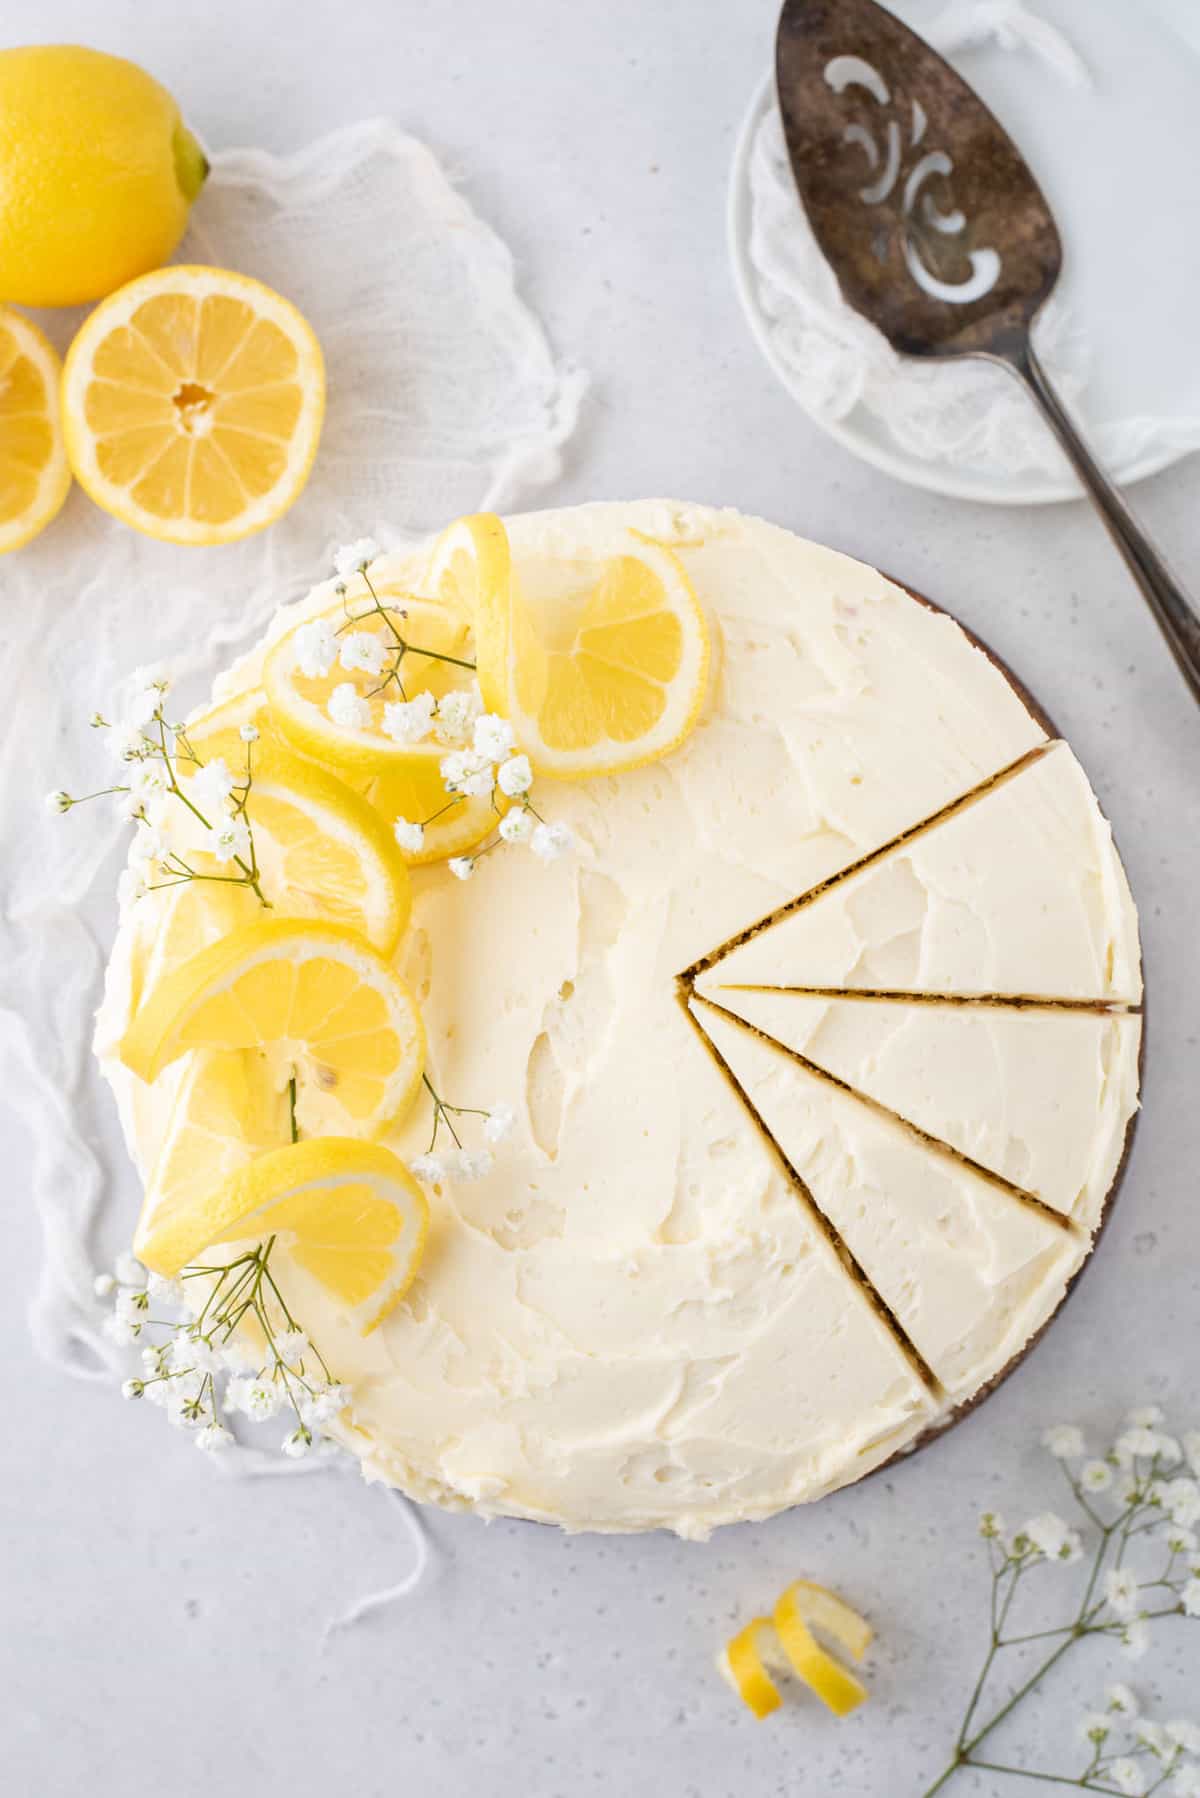 Overhead view of round lemon layer cake, with 3 slices cut